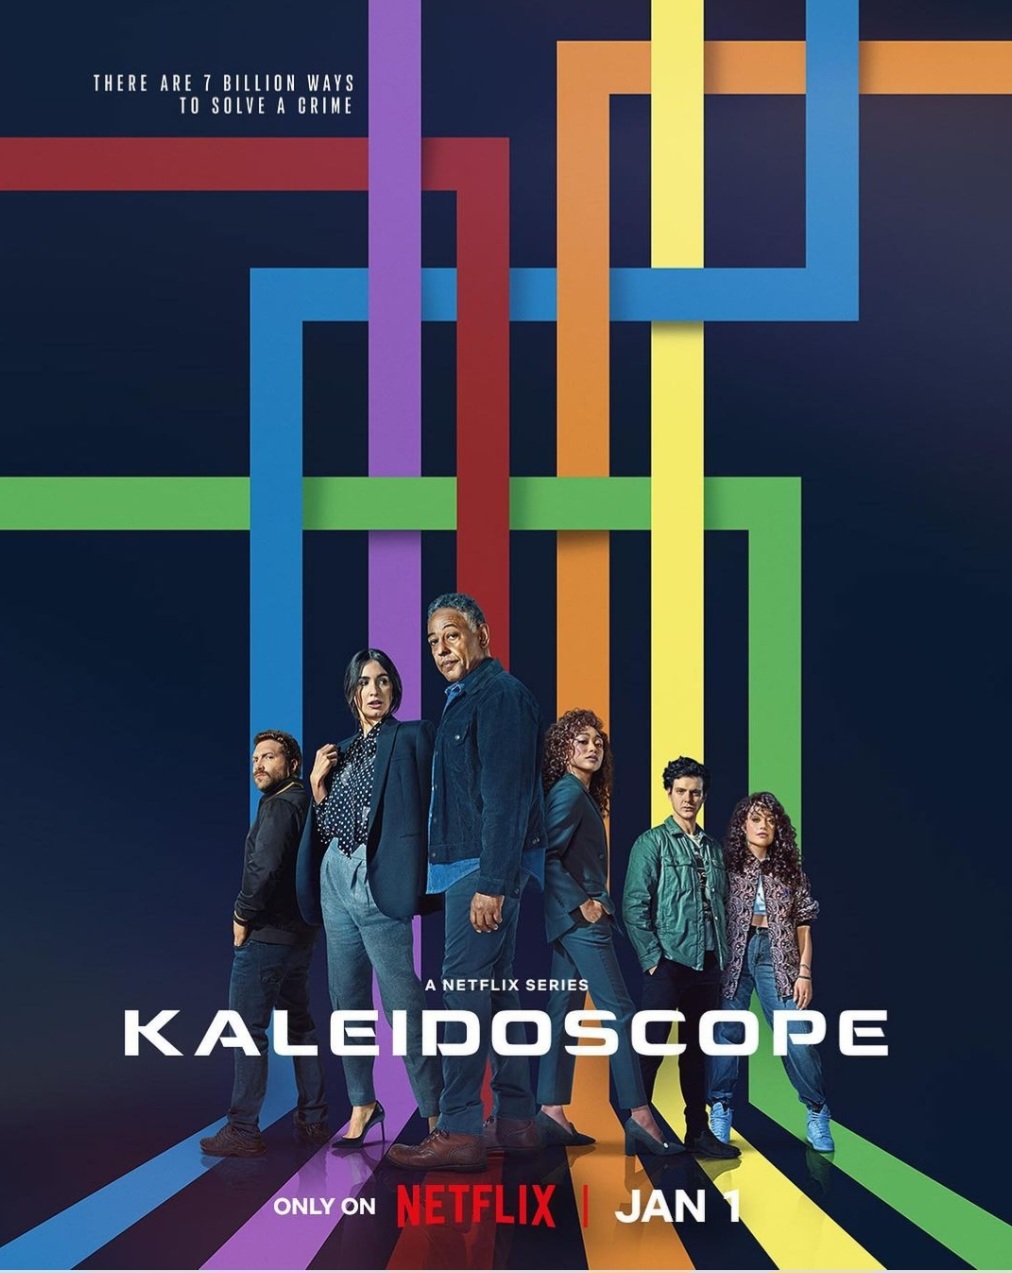 Netflix's "Kaleidoscope" provides an alternative viewing style to spice up the heist genre.